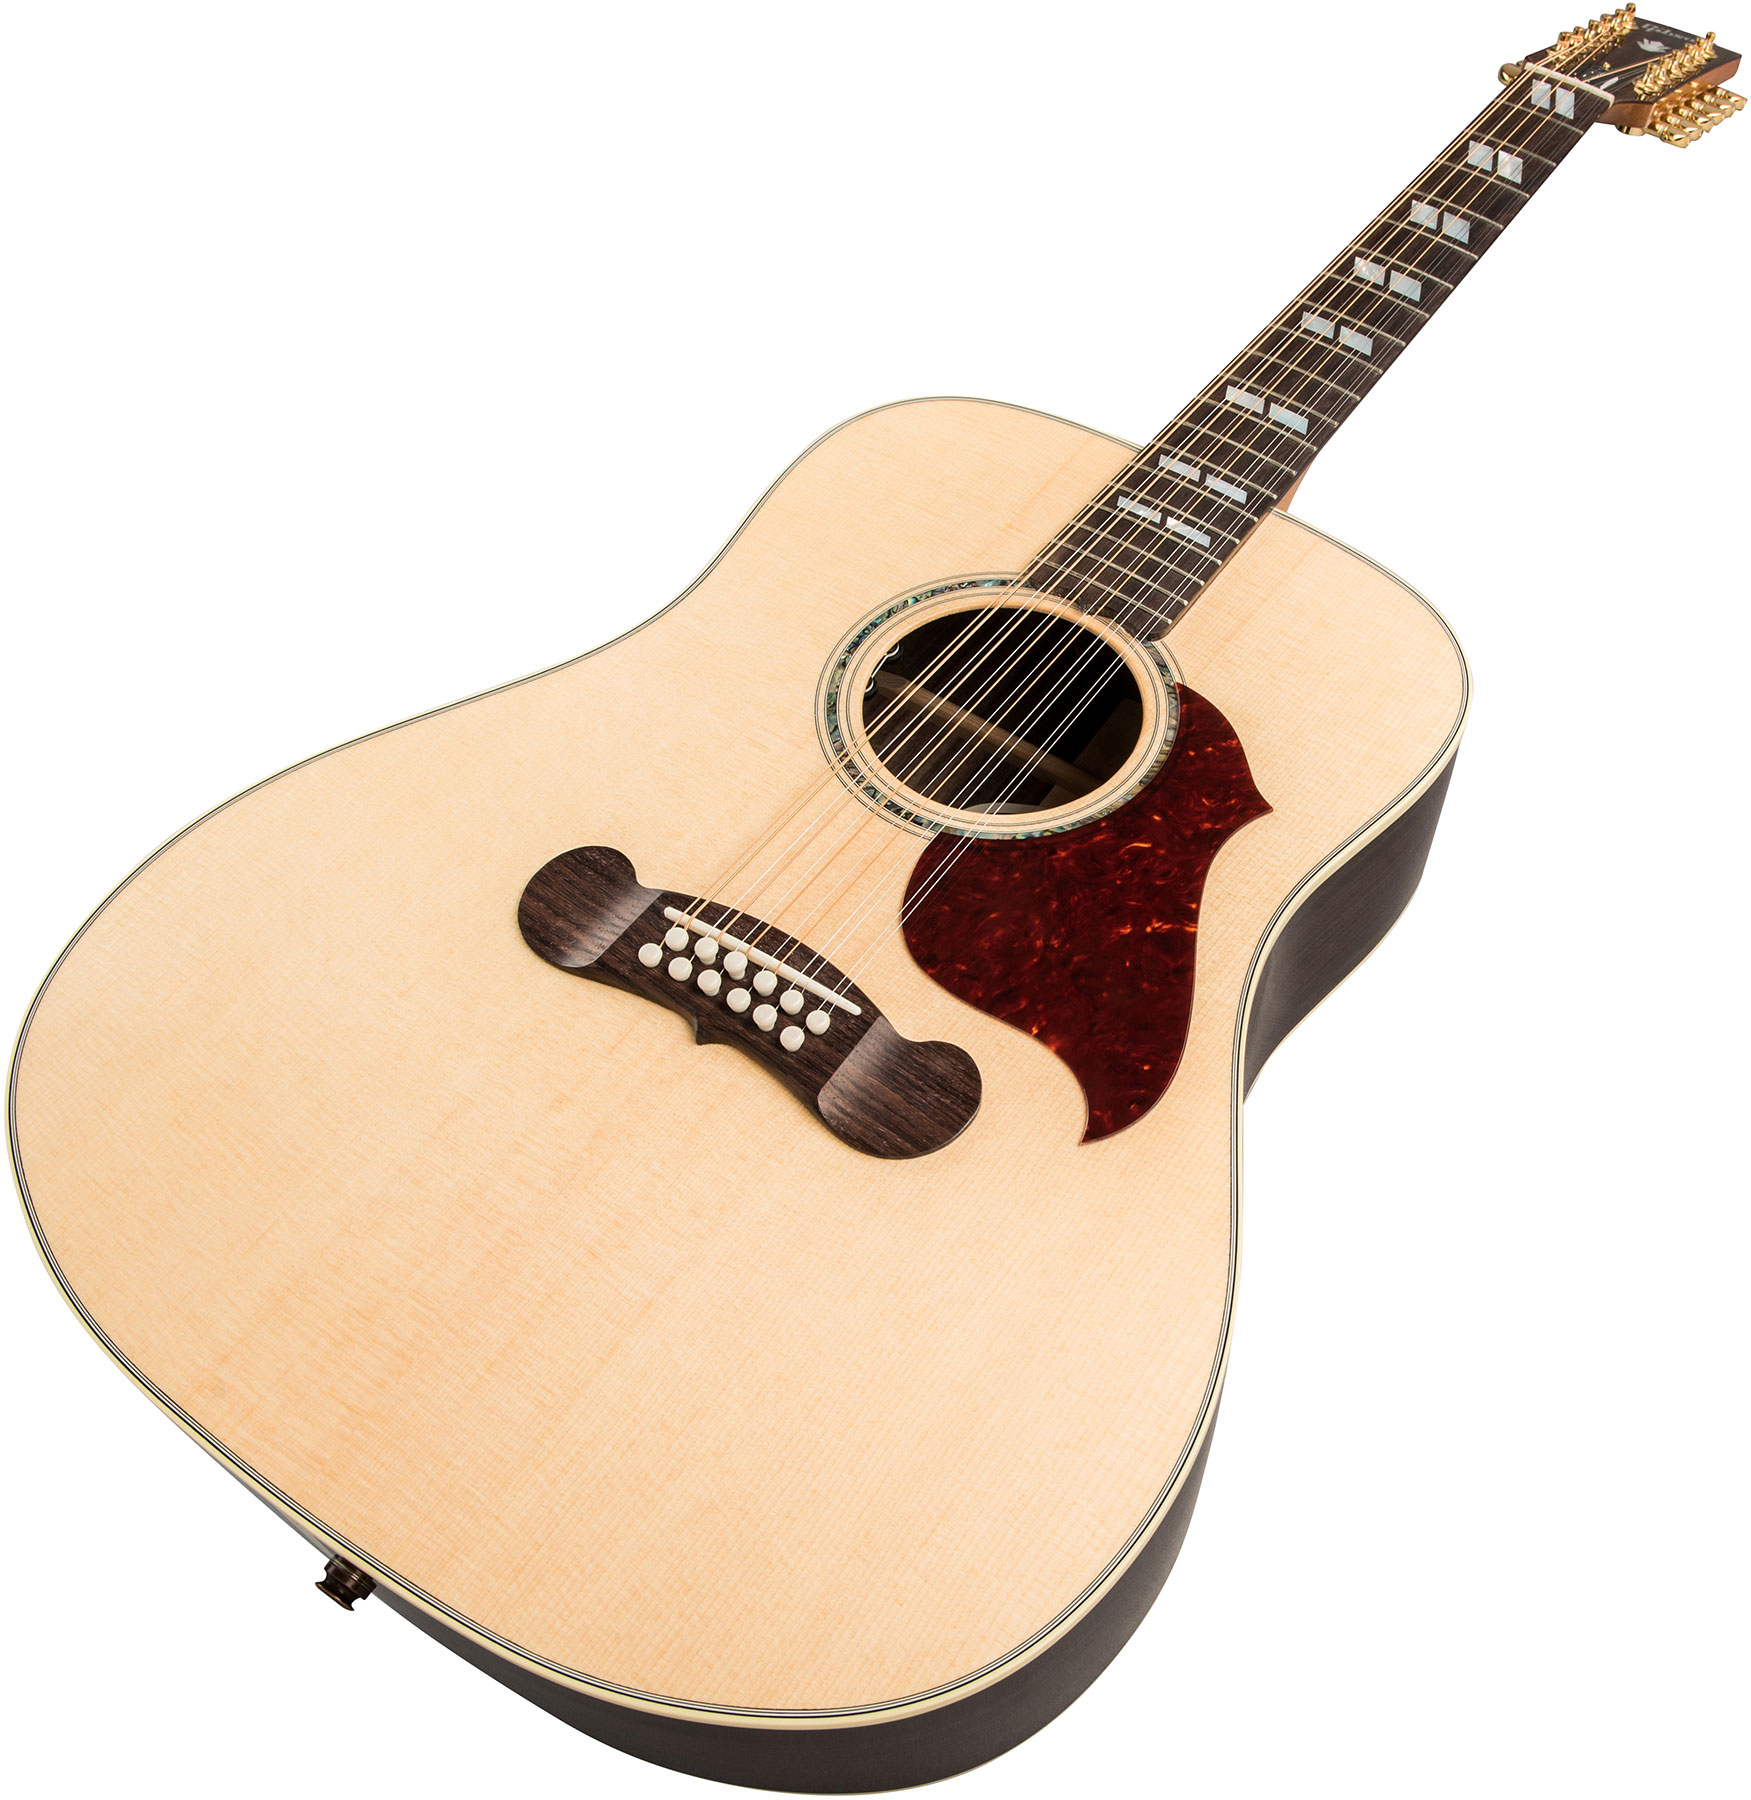 Gibson Songwriter 12-string 2019 Dreadnought 12-cordes Epicea Palissandre Rw - Antique Natural - Guitare Acoustique - Variation 1